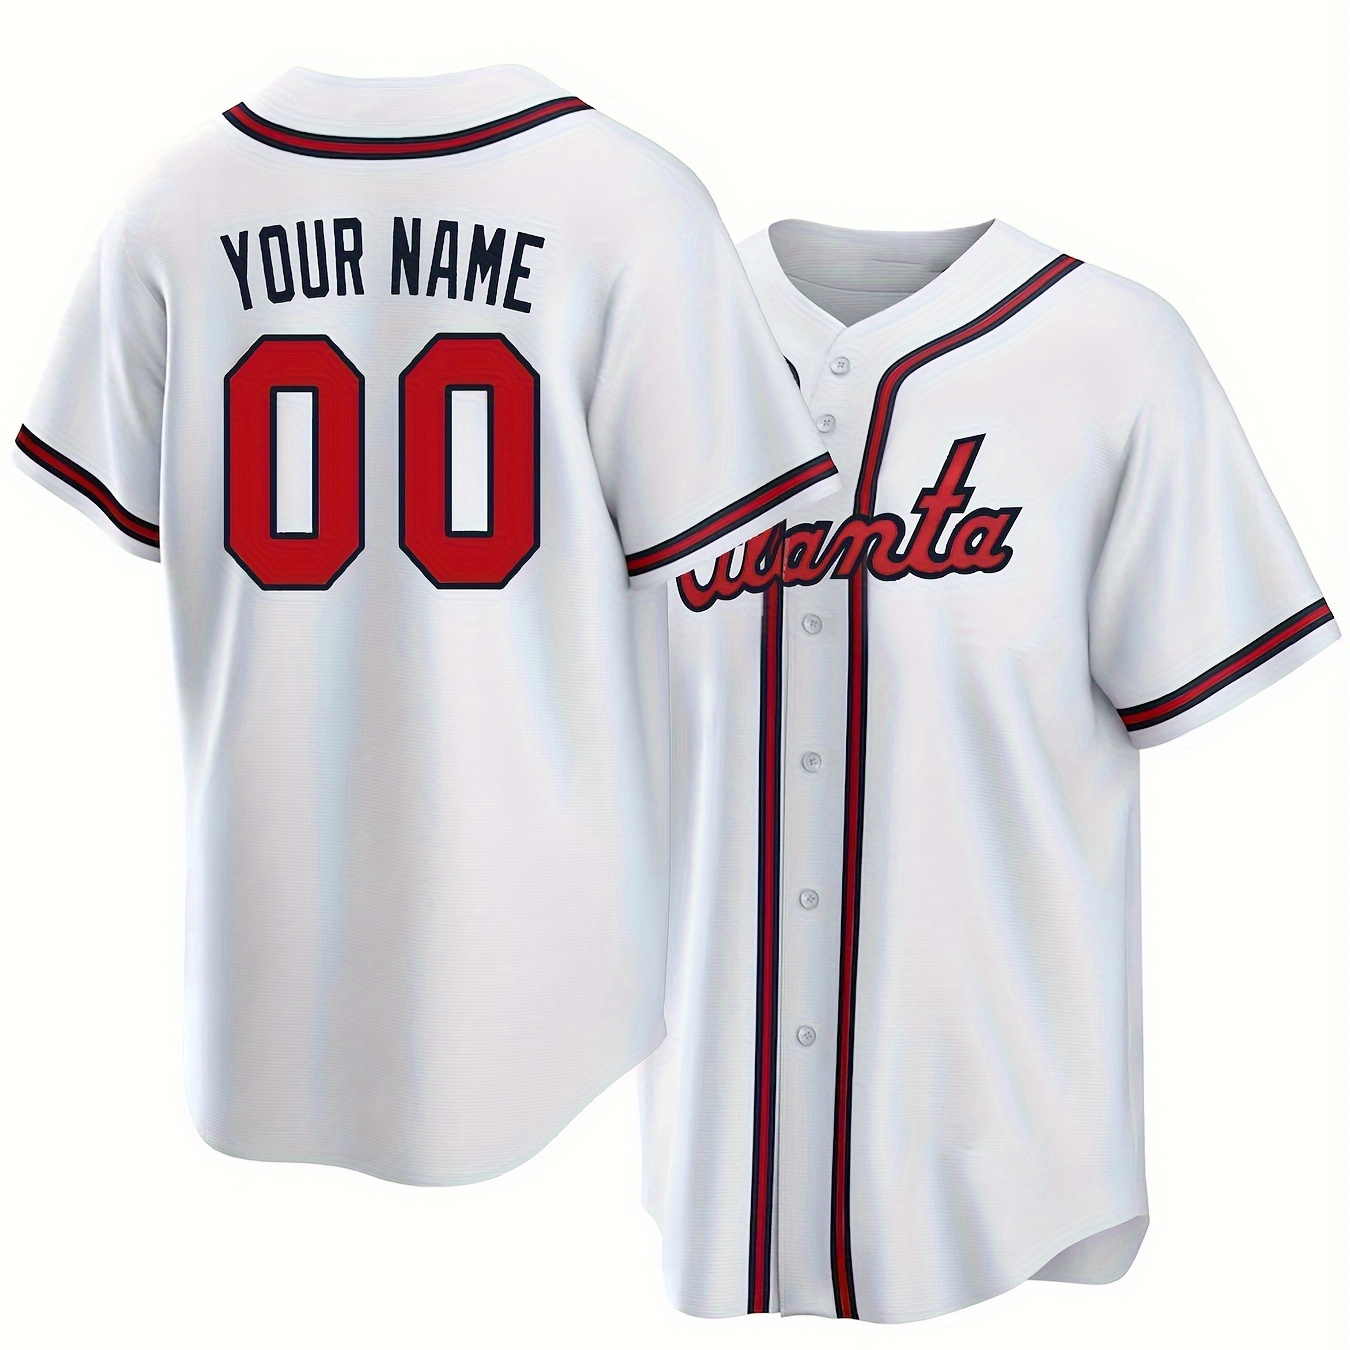 

Customized Letter And Number Embroidery, Men's Short Sleeve V-neck Baseball Jersey, Comfy Top For Training And Competition